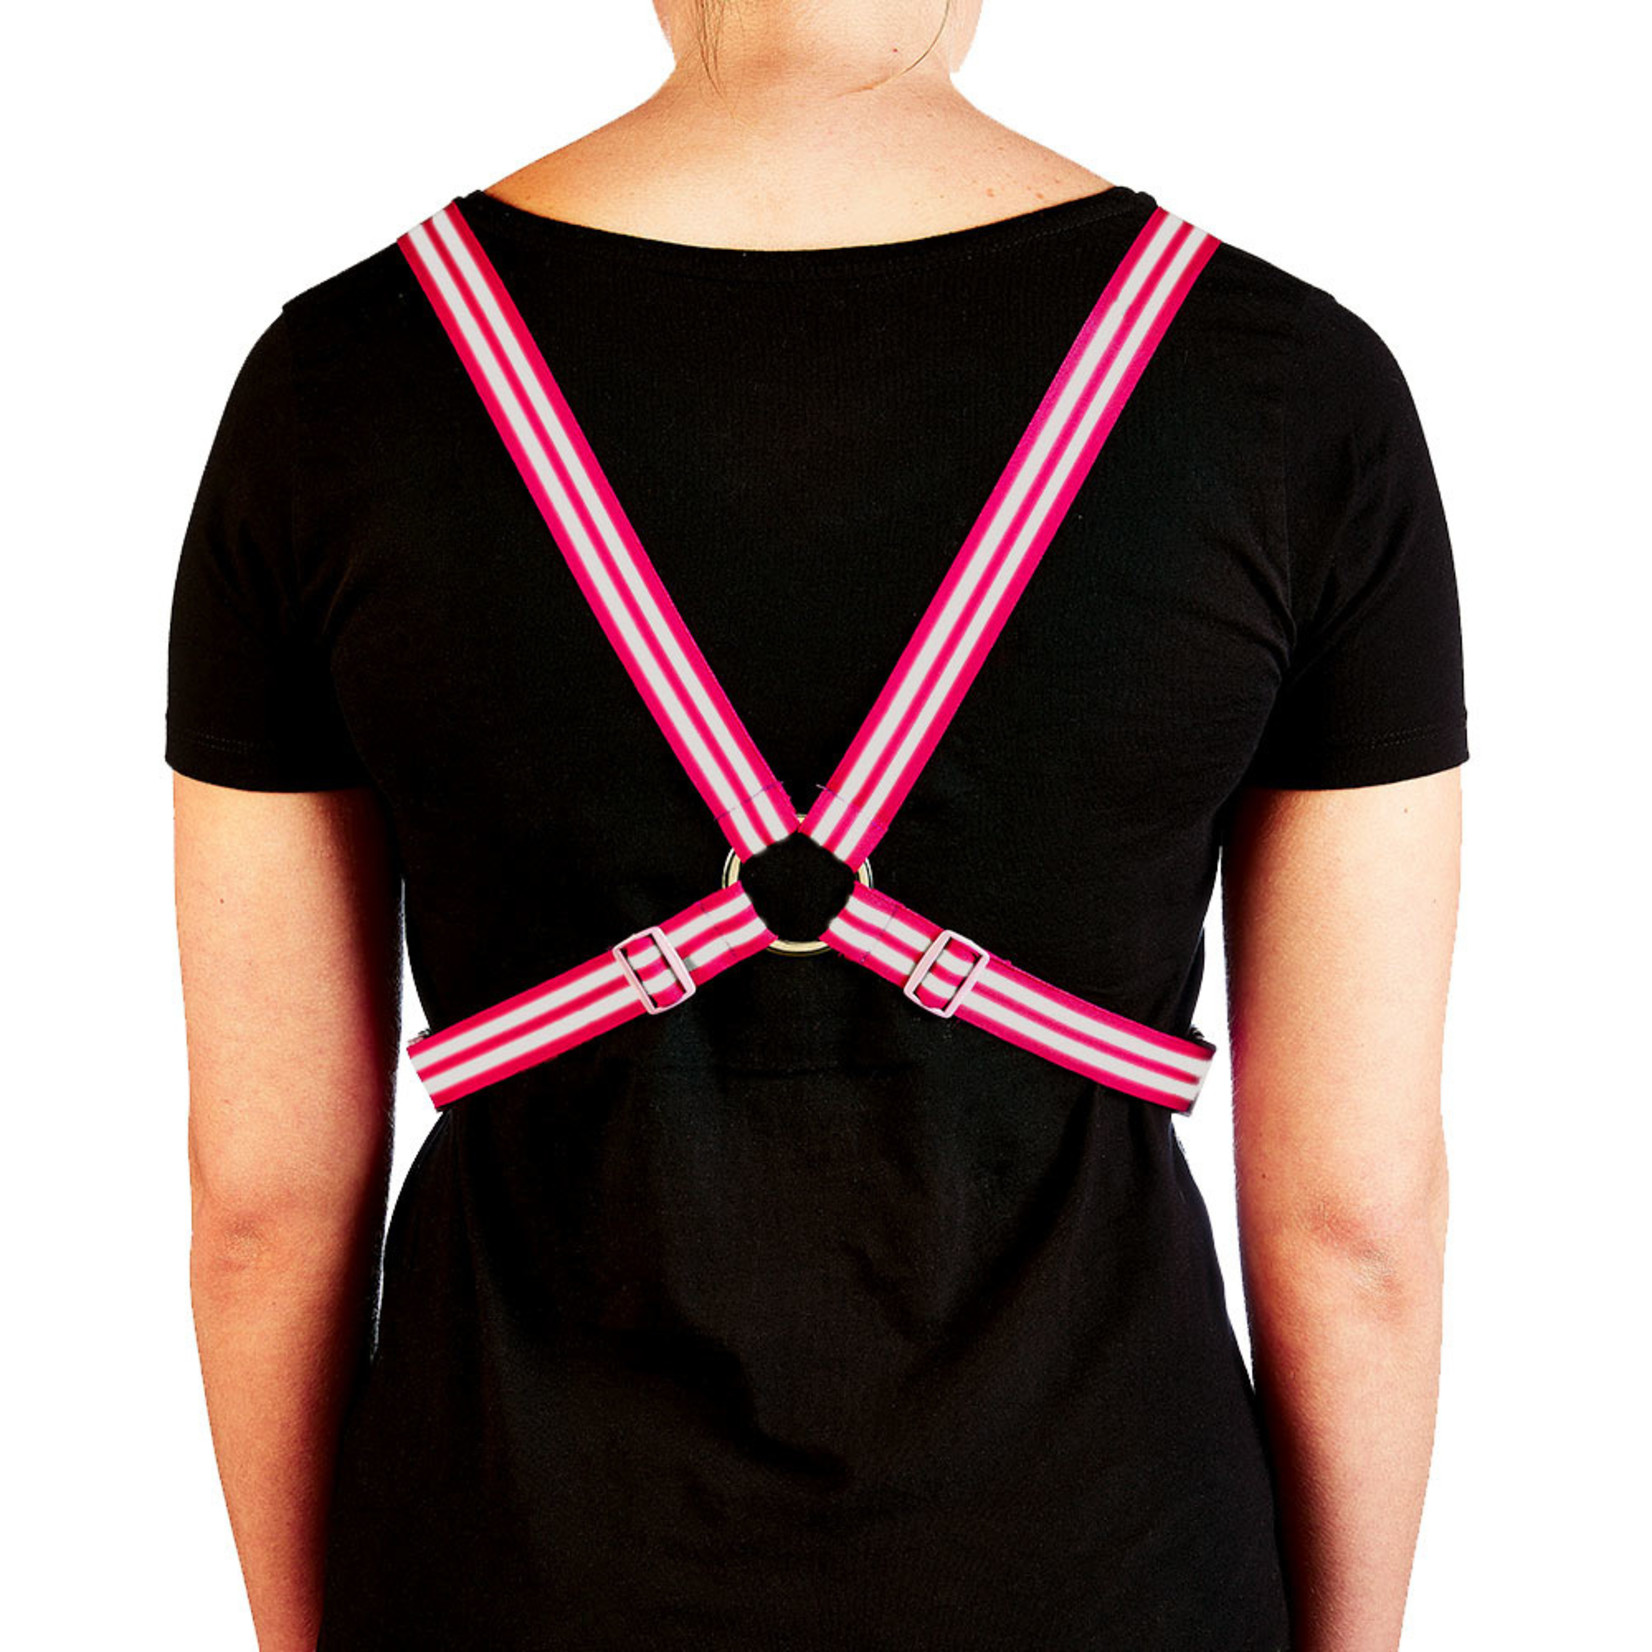 Monkey See MonkeySee Harness - Light Weight And Comfortable - Magenta